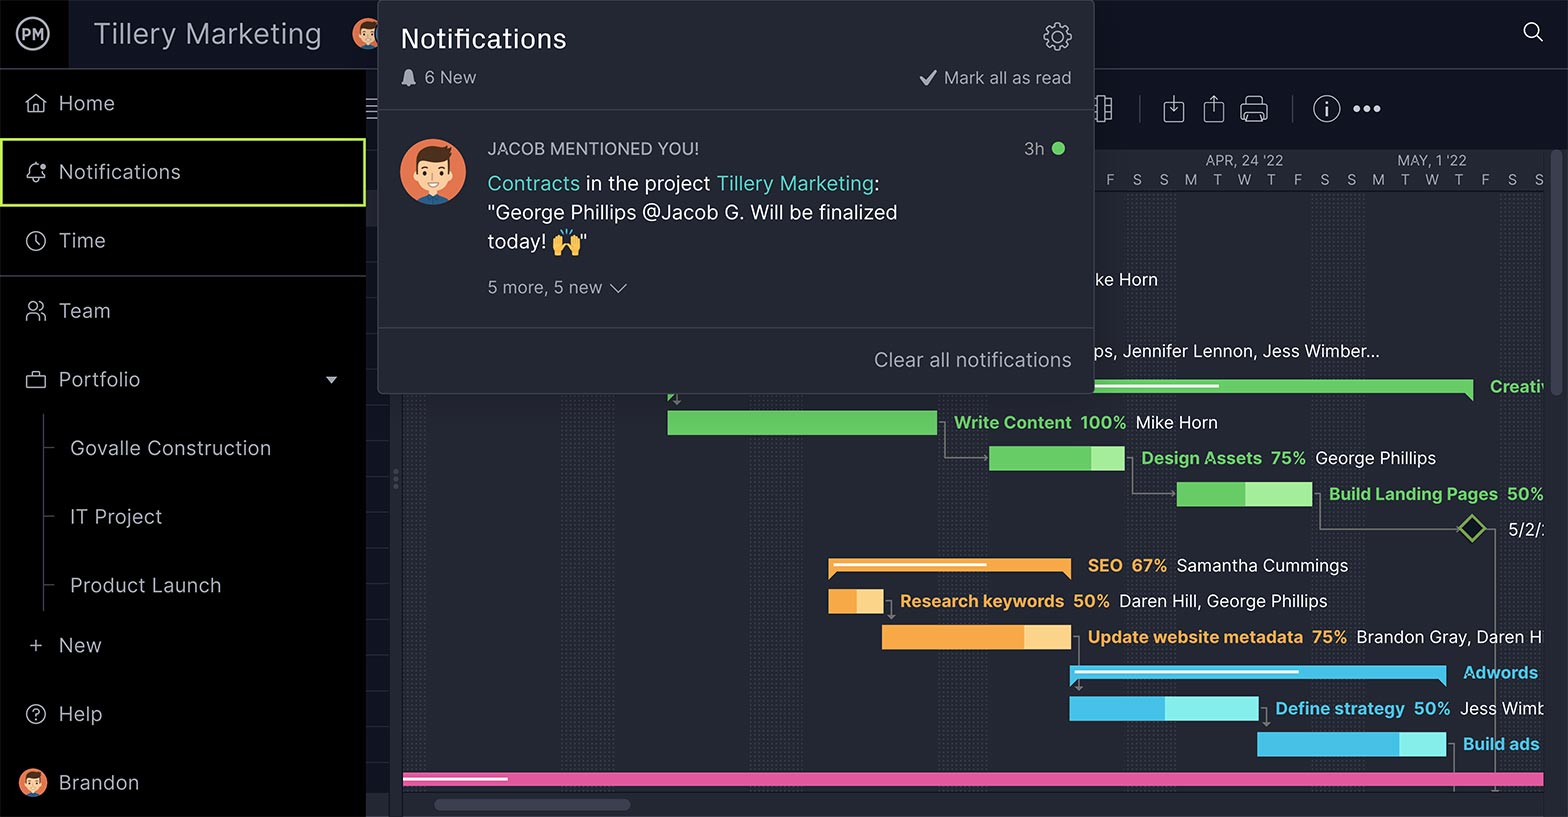 ProjectManager's real time notifications, a program management tool